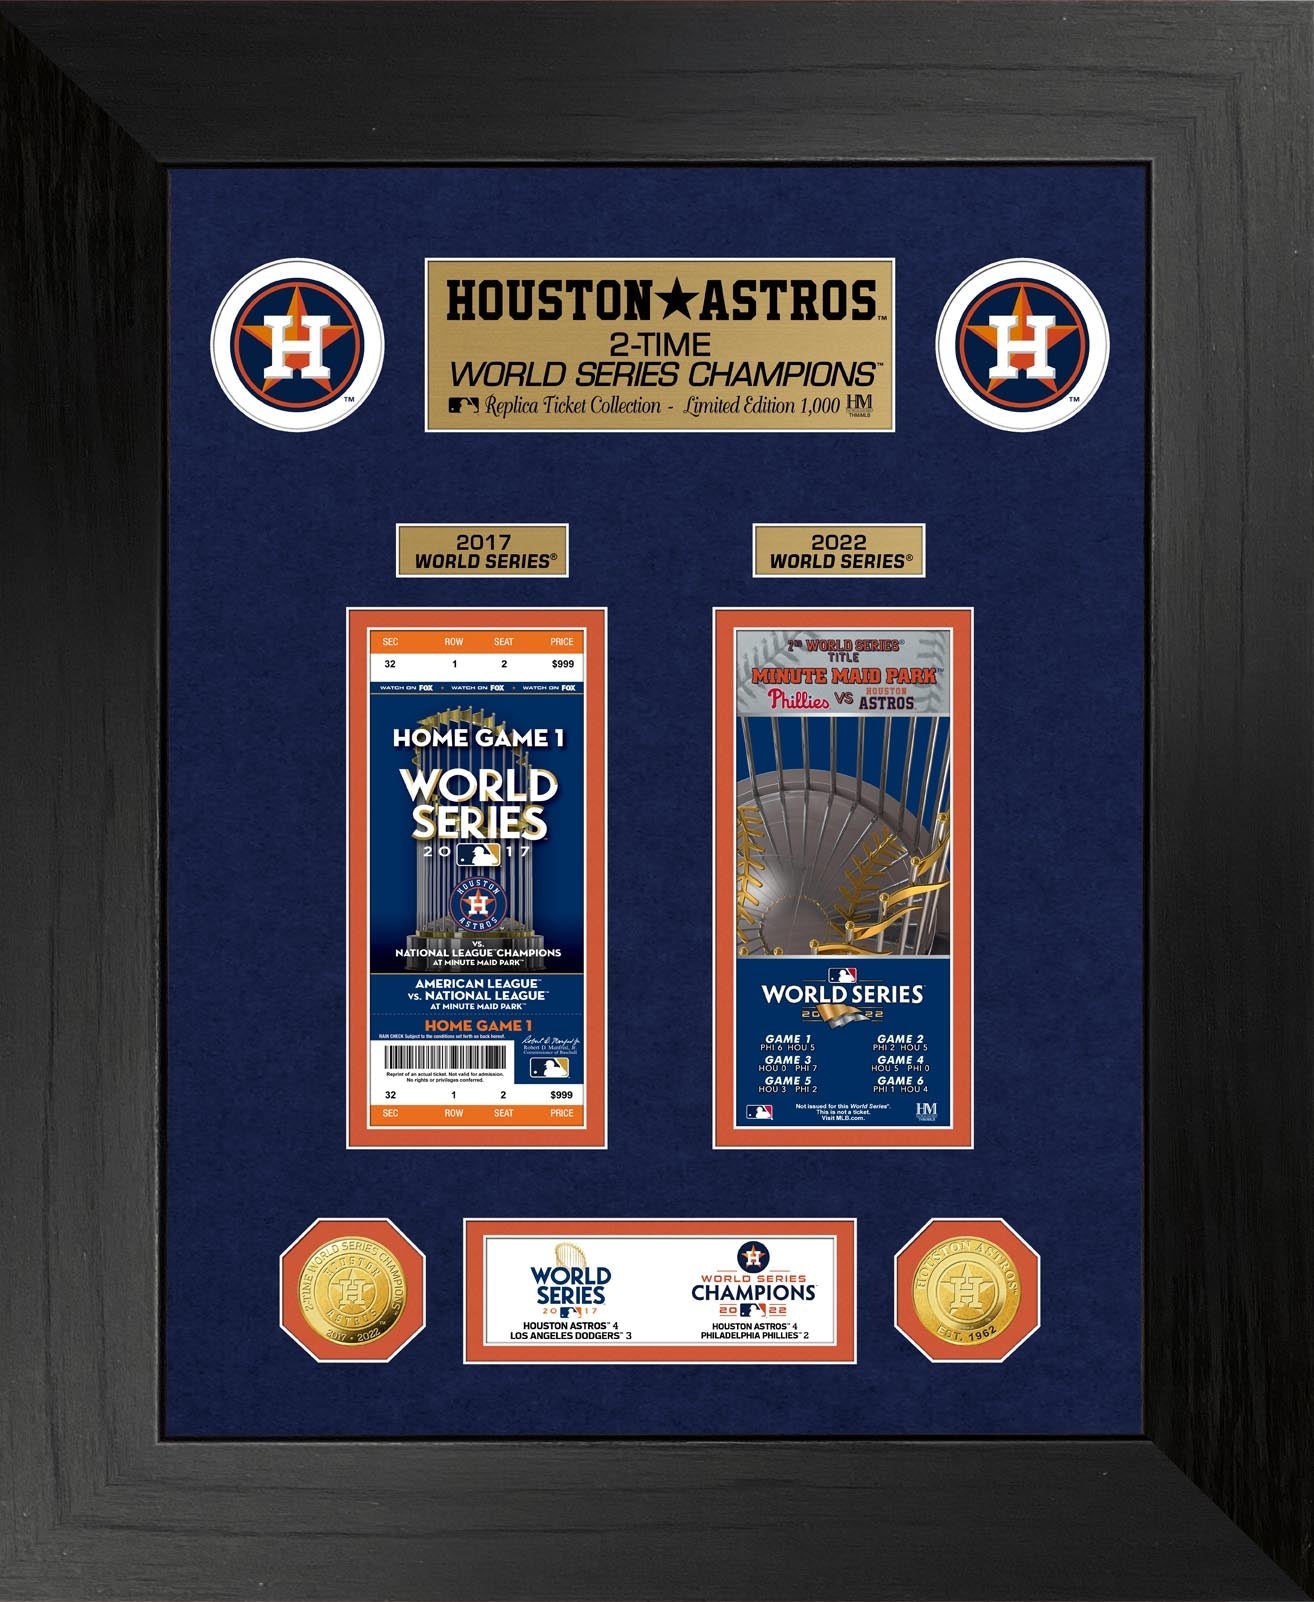 Houston Astros Deluxe  2-Time World Series Champions Gold Coin & Ticket Collection